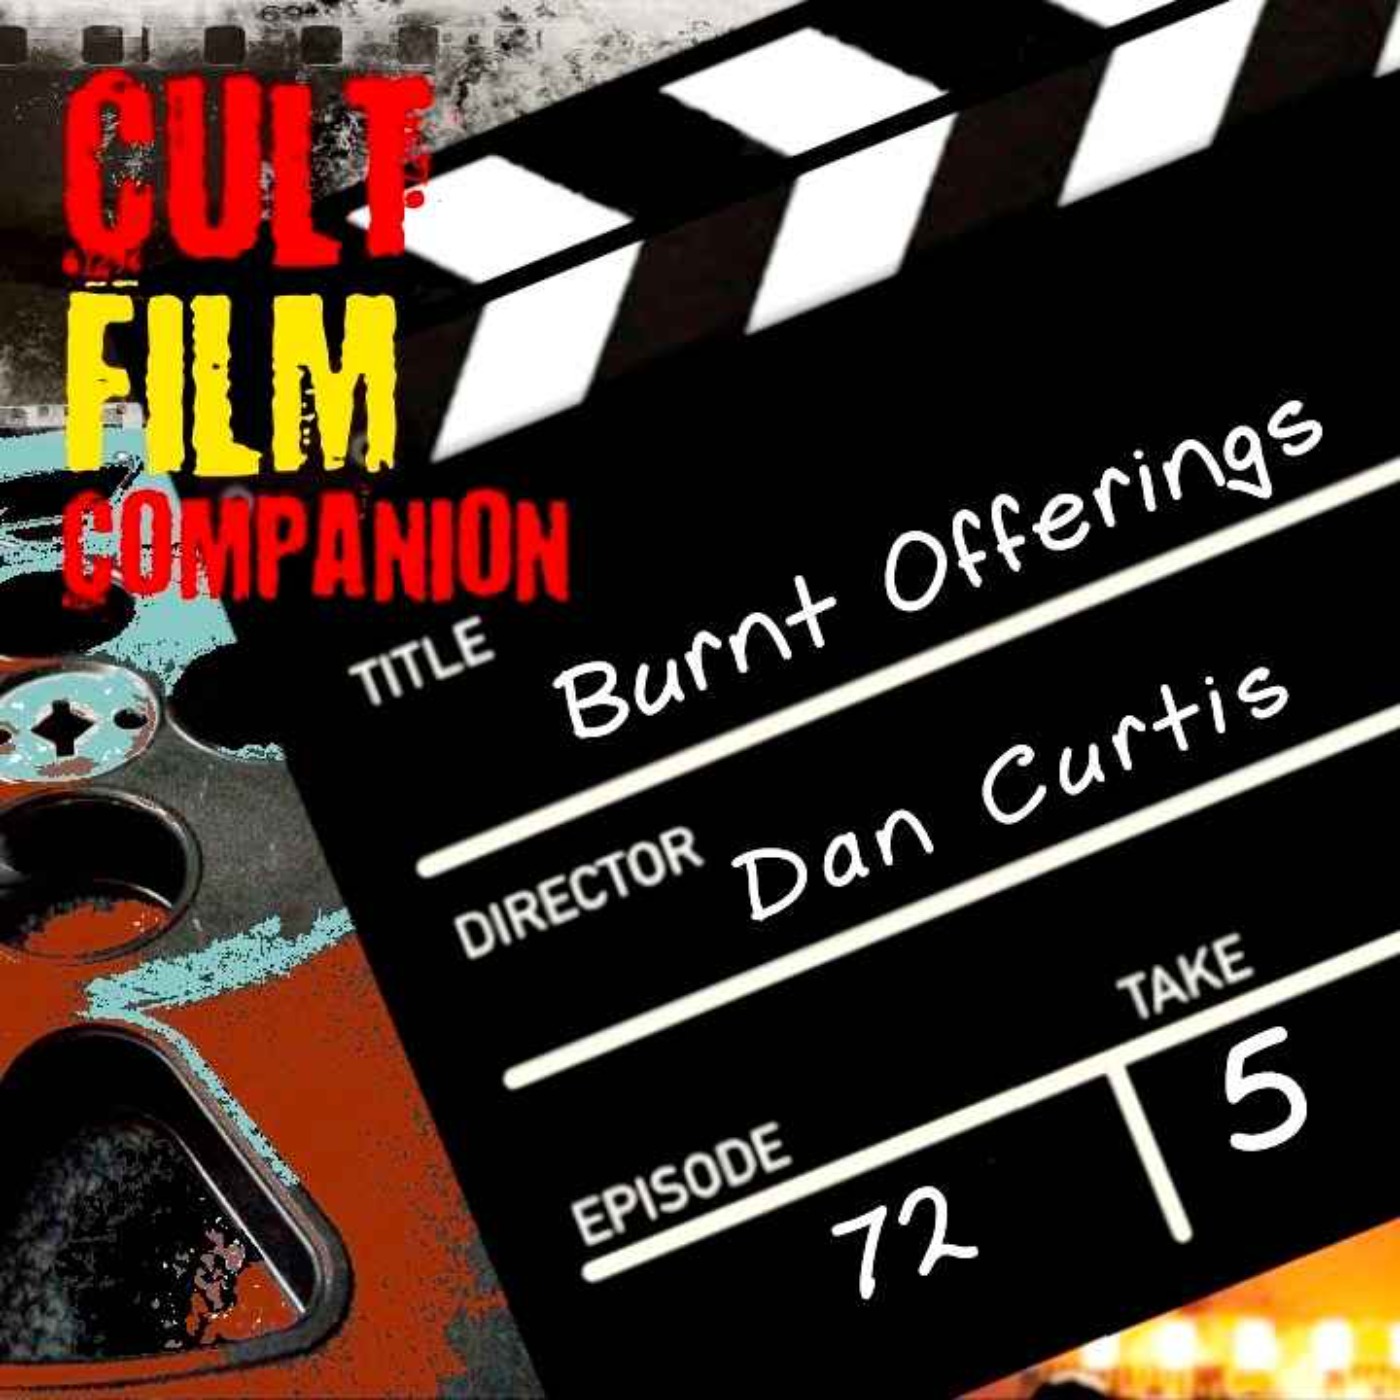 Ep. 72 Burnt Offerings directed by Dan Curtis